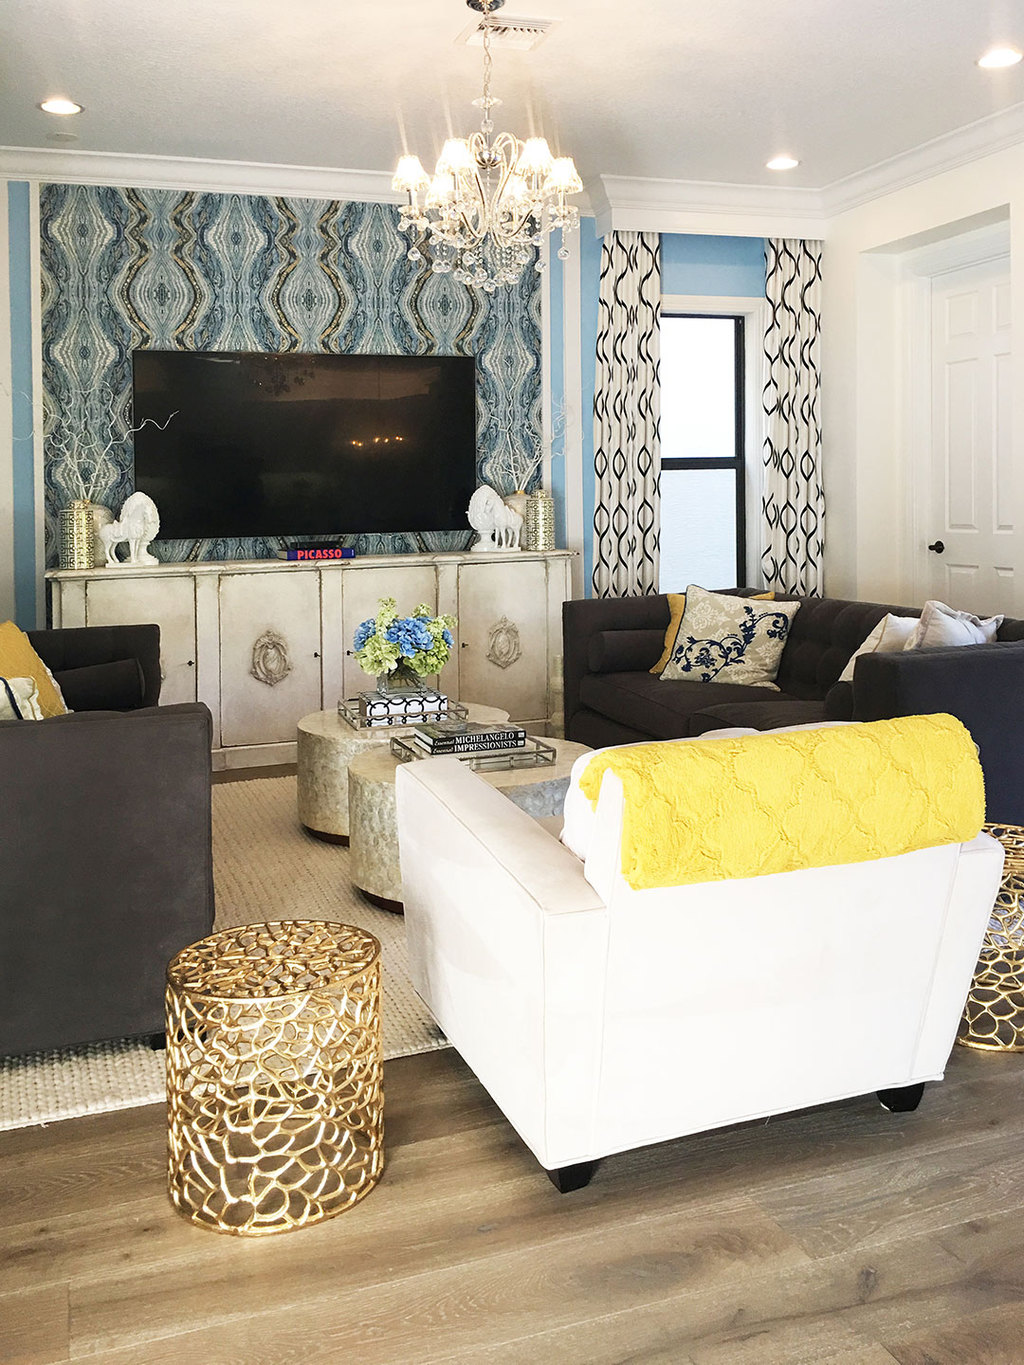 family-room-blue-walls-gold-accents-chandelier